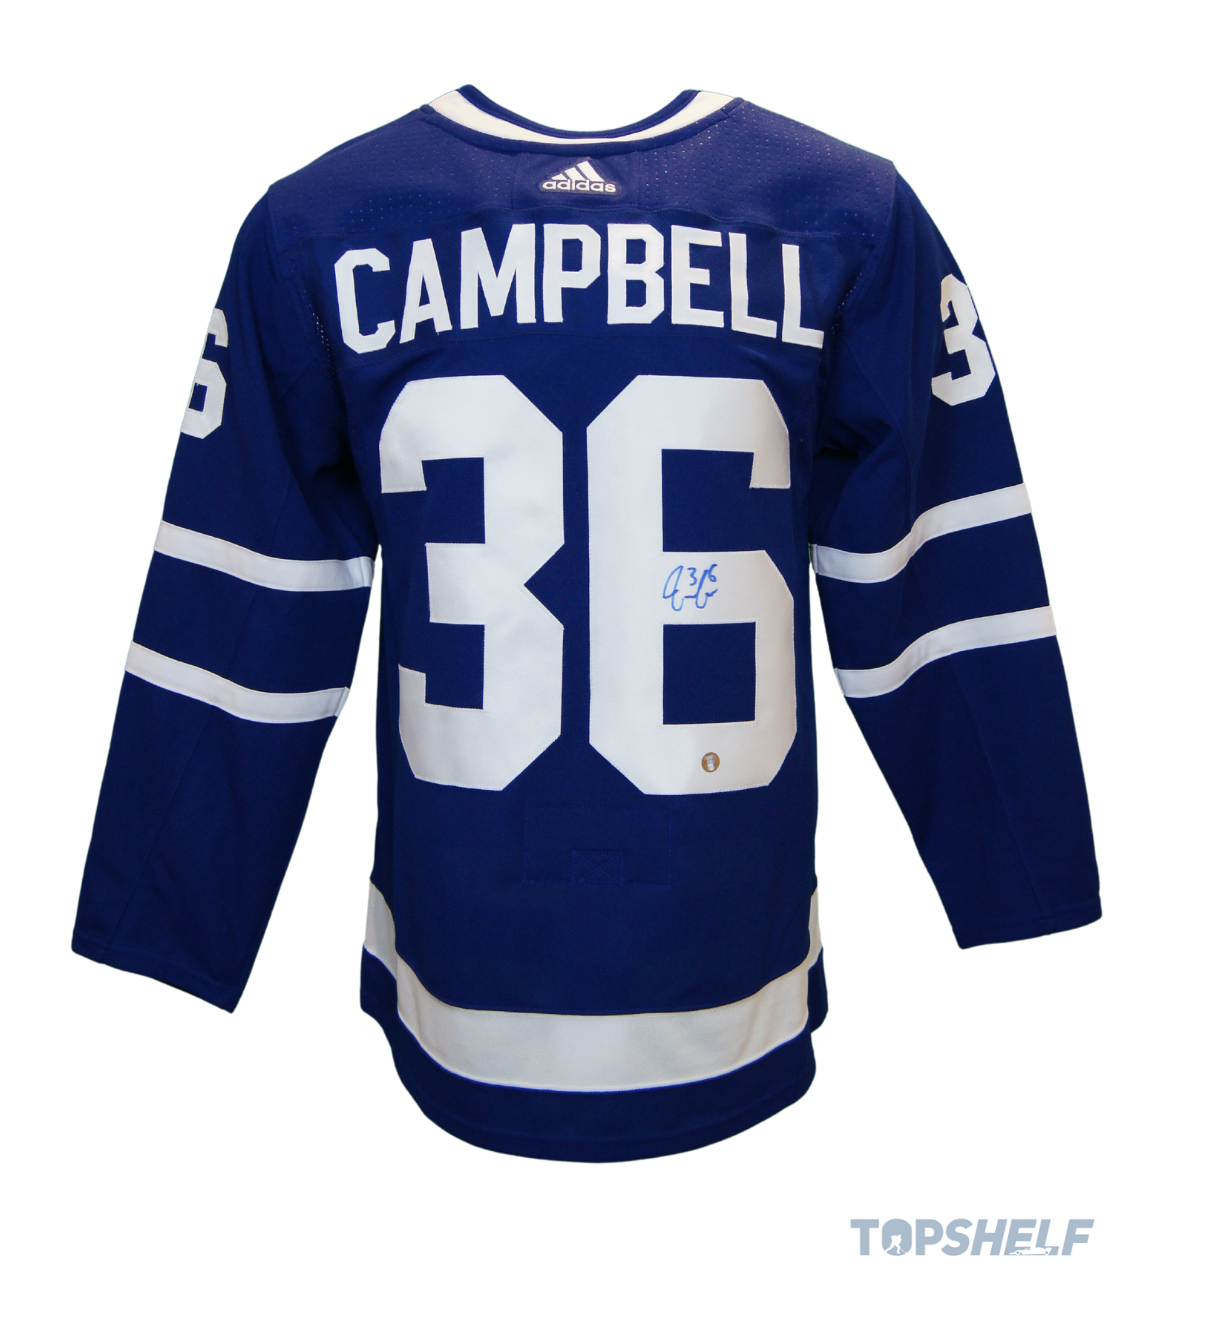 Jack Campbell Autographed Toronto Maple Leafs Home Jersey - Adidas Authentic